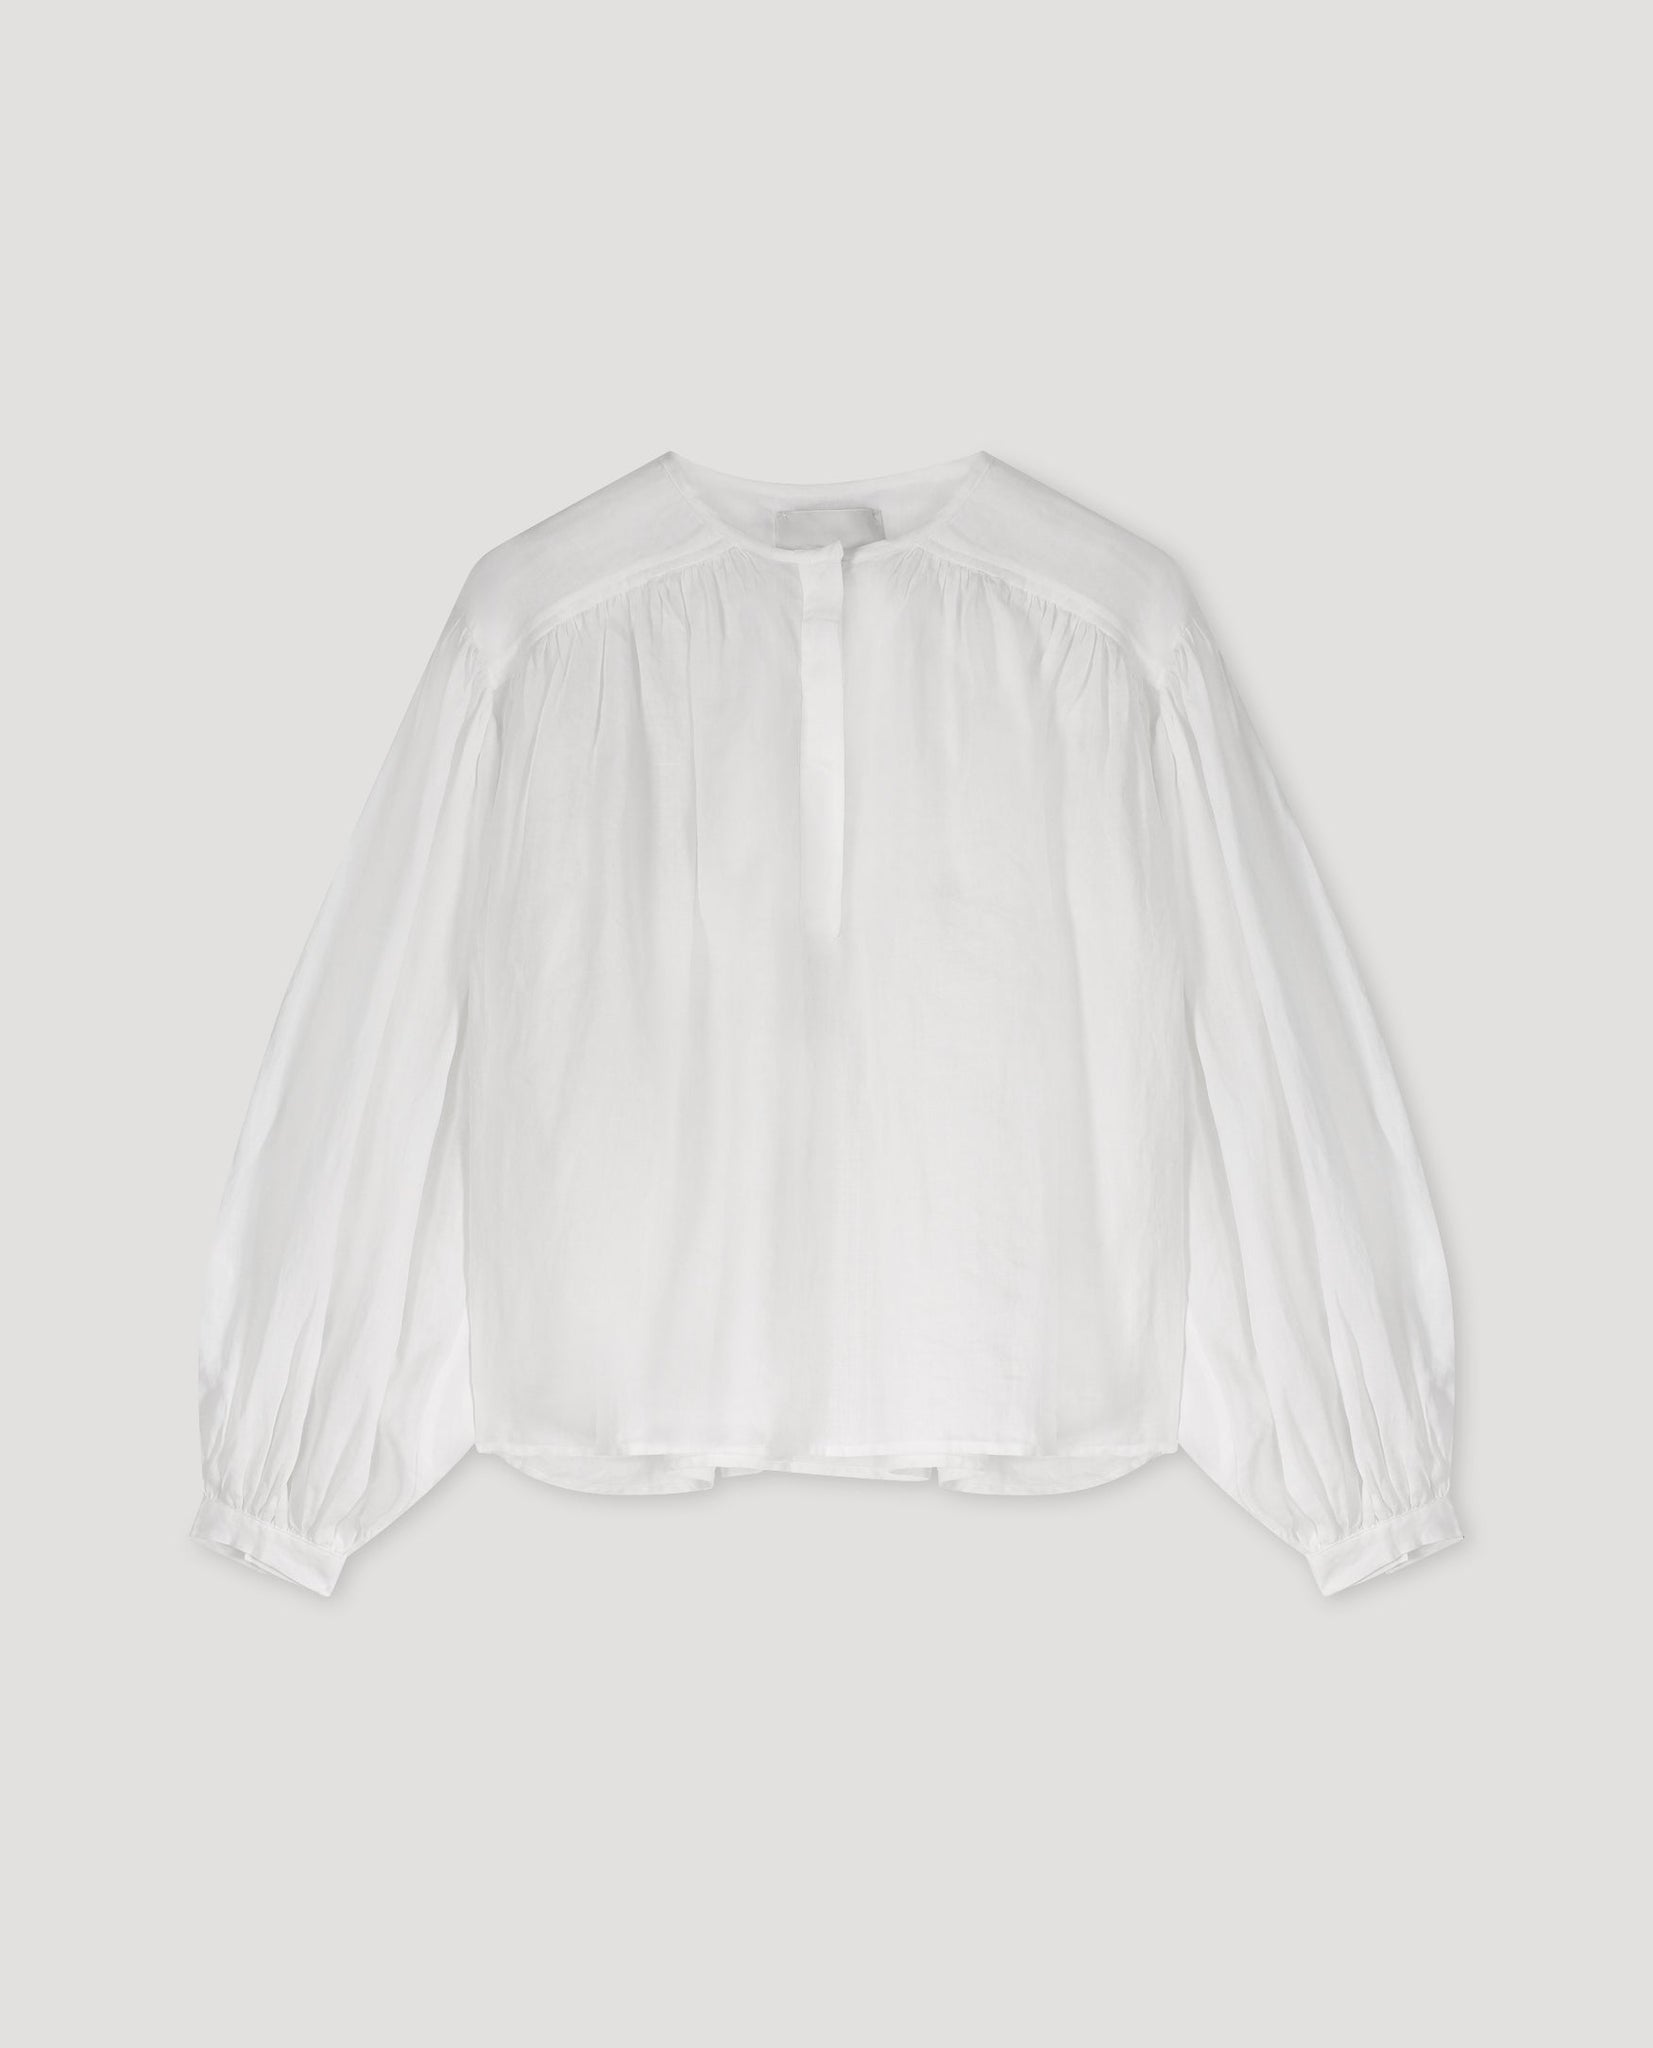 Sophie Top in off white by Róhe